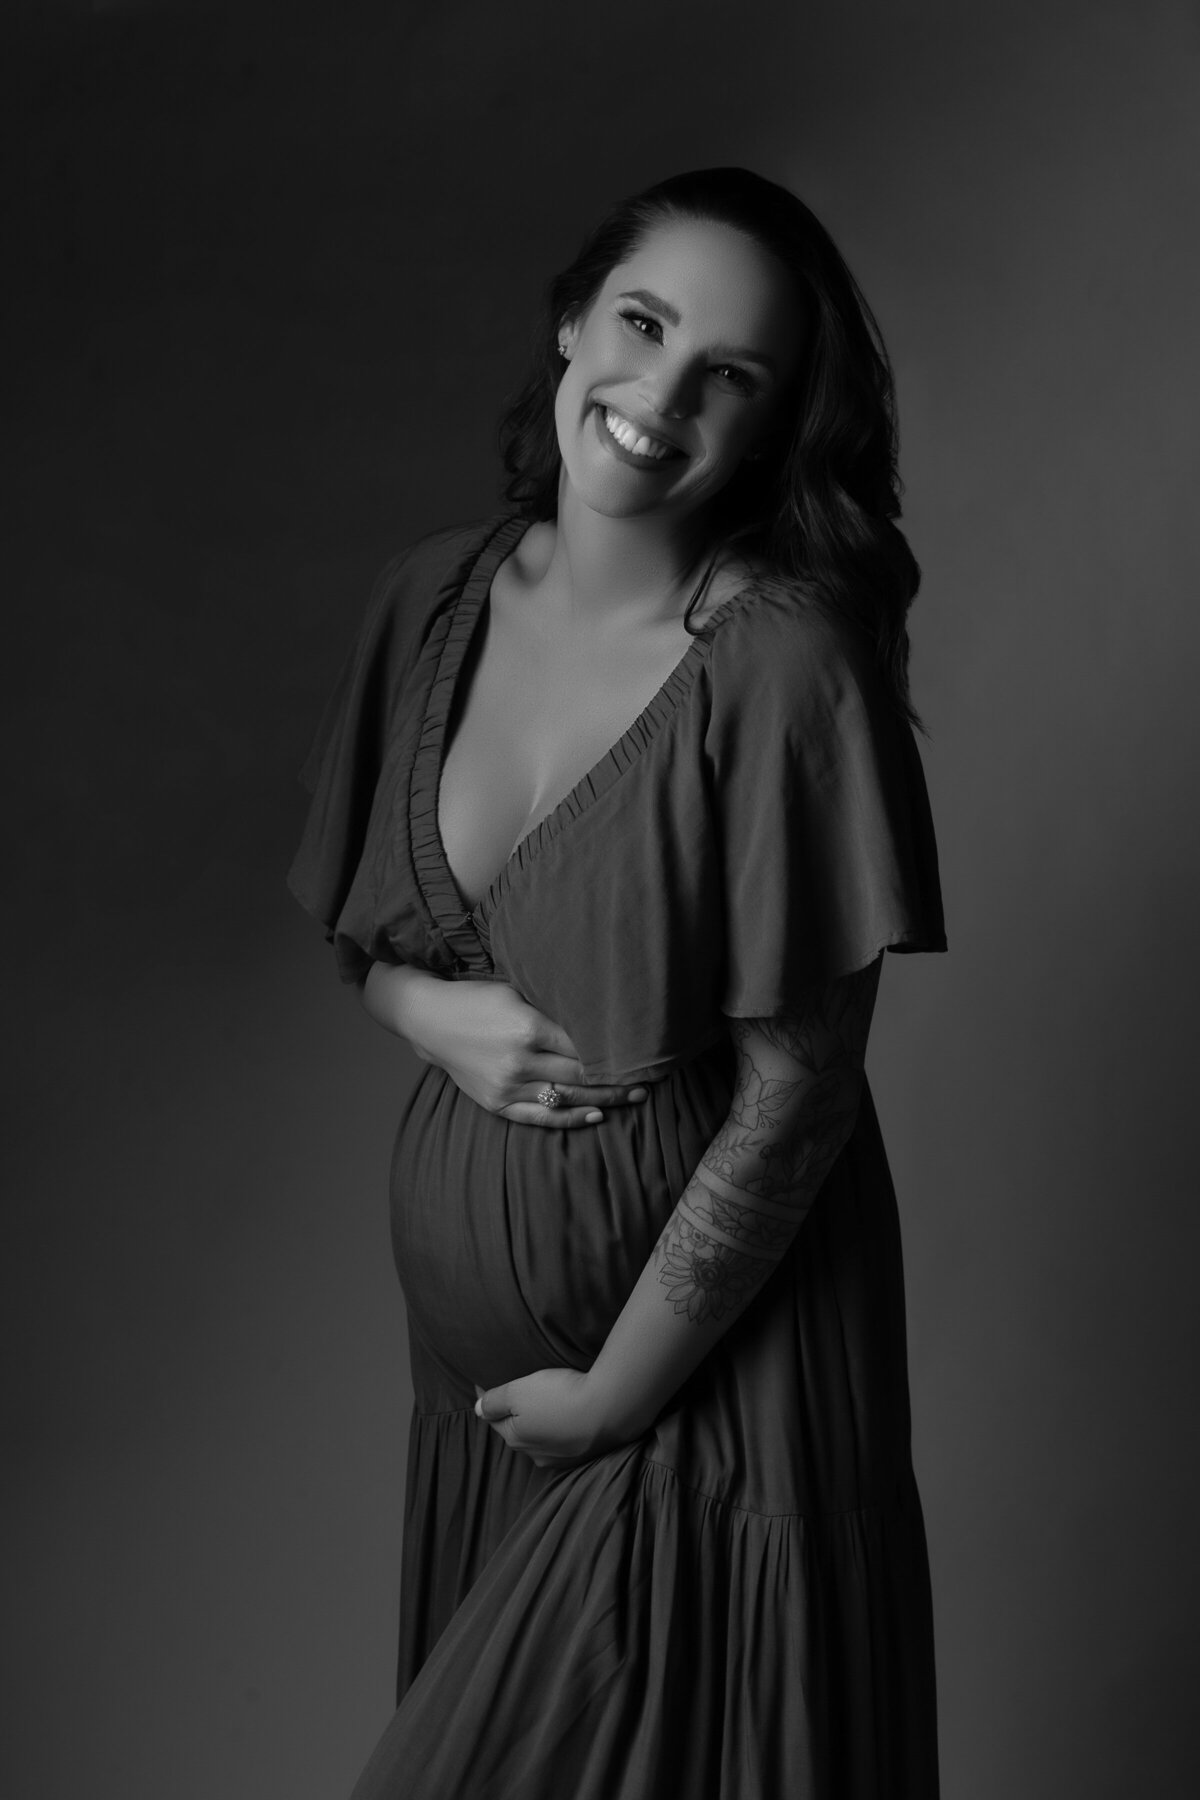 In BW Raleigh NC Maternity Portrait Photographer 15